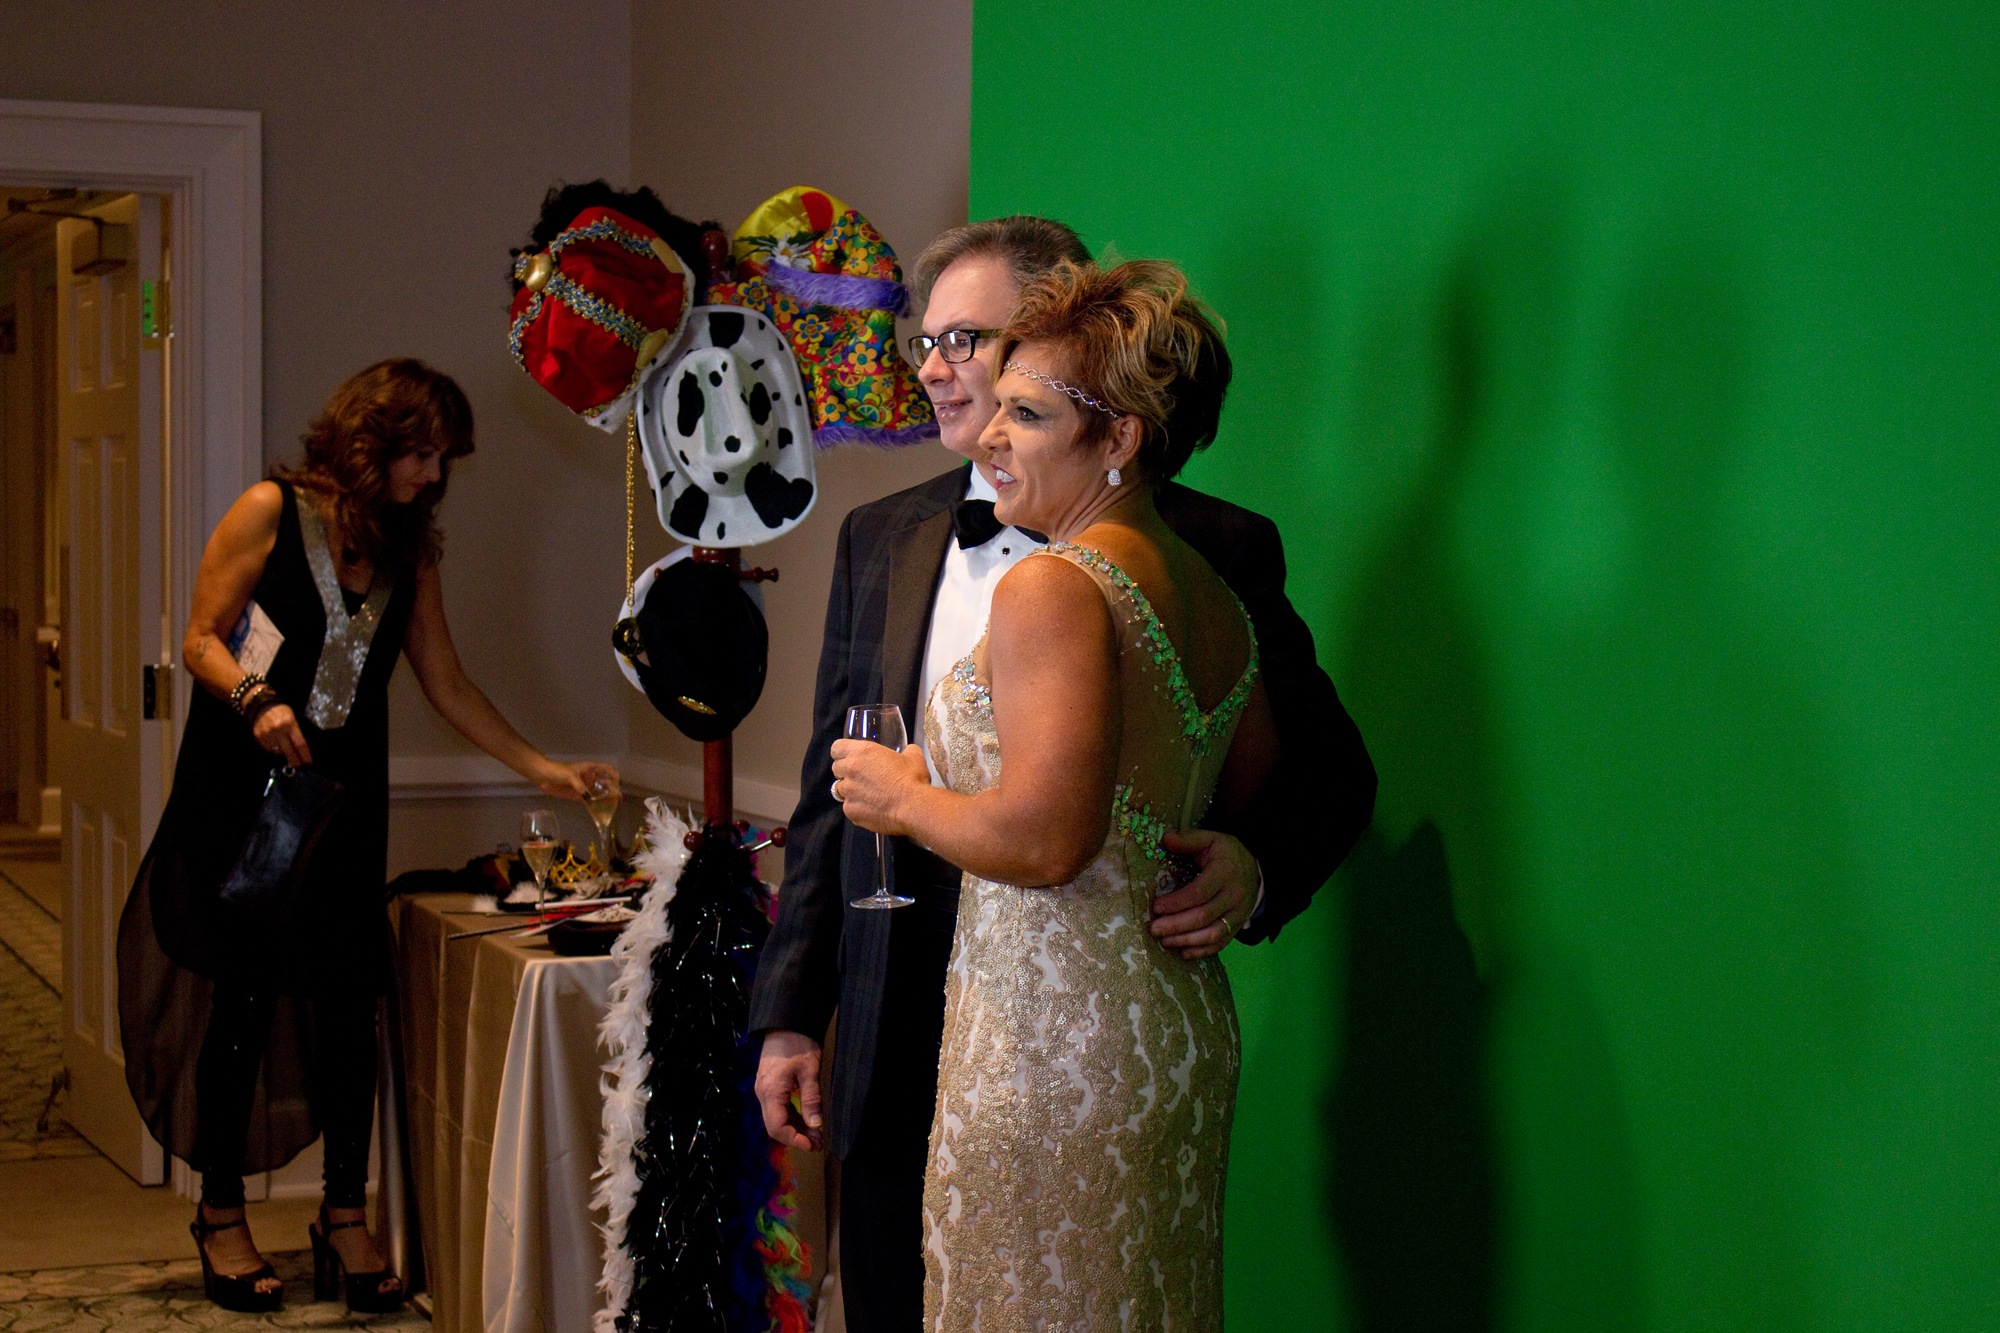 Dowm and Jim Hawley have fun at the photo booth.